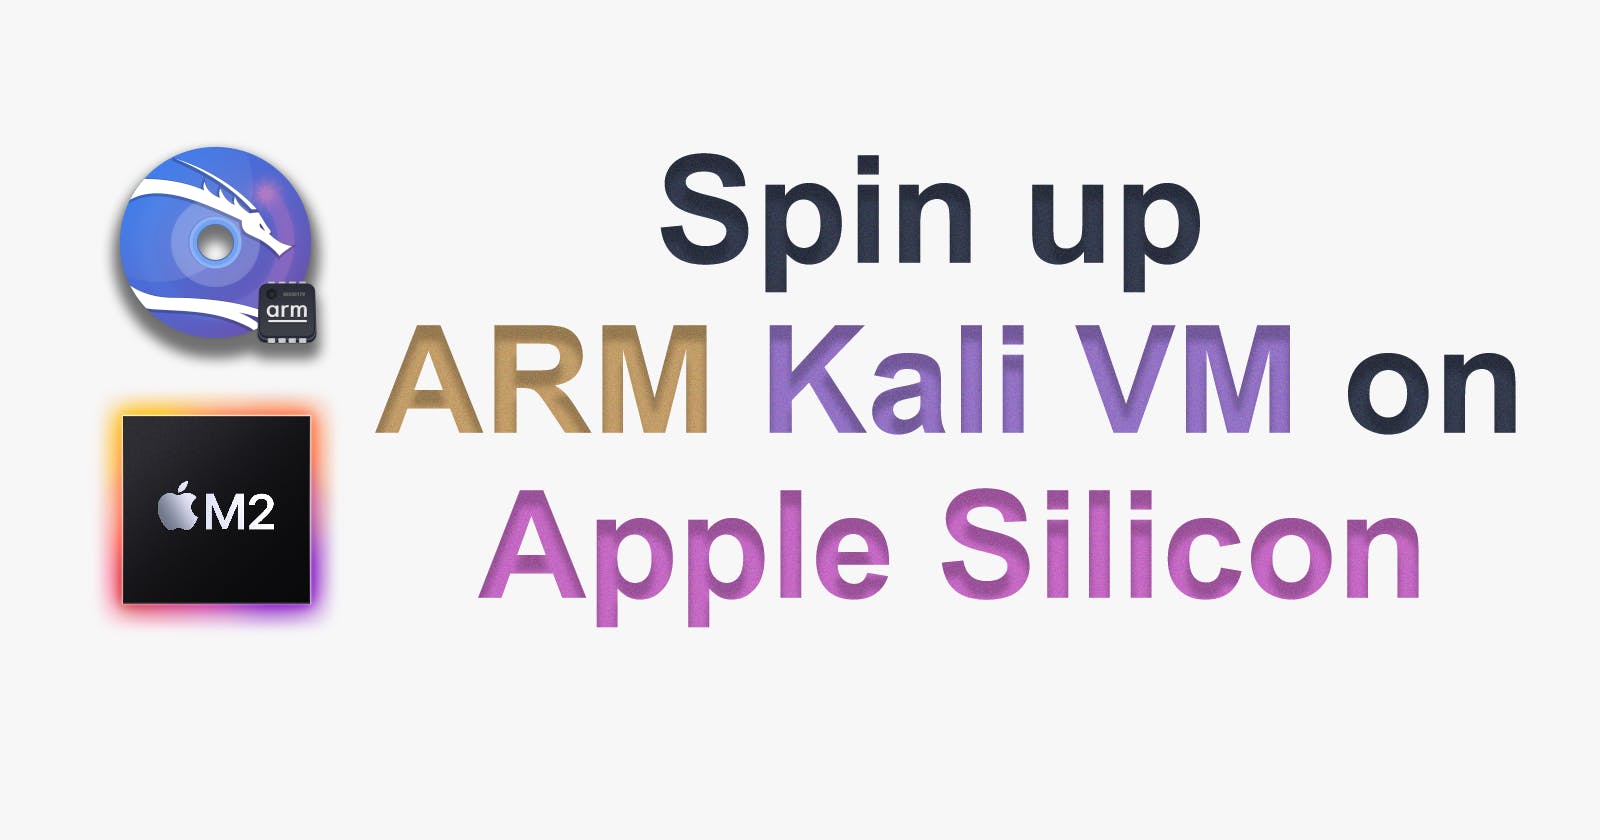 Spin up ARM Kali VM on Apple Silicon